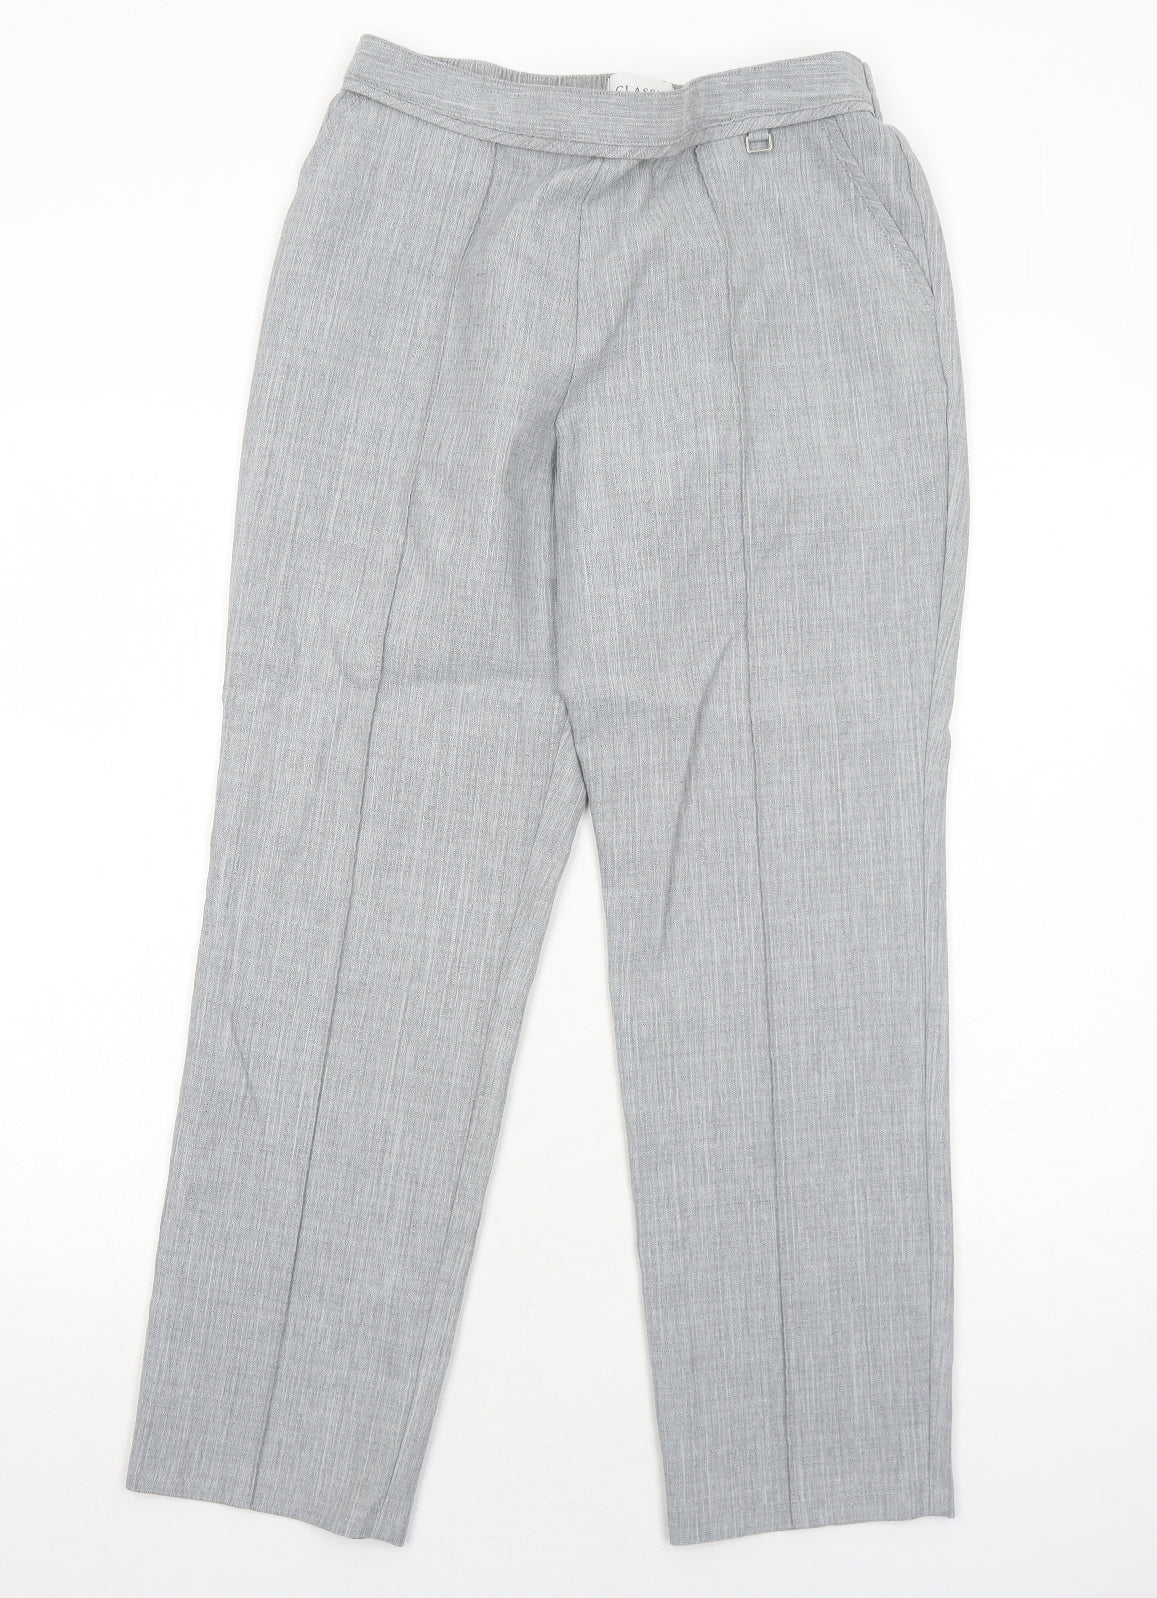 Marks and Spencer Womens Grey Polyester Trousers Size 12 Regular